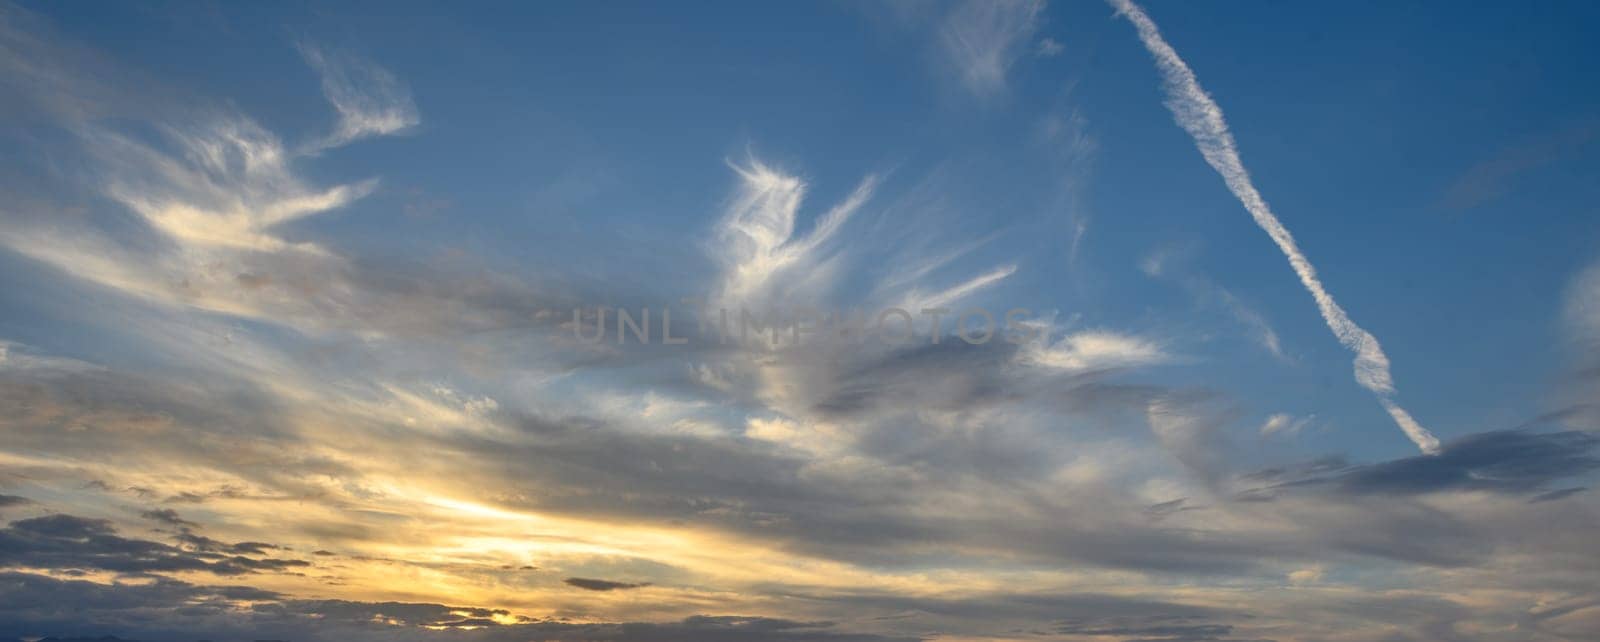 winter sunset sky with clouds in northern cyprus 2